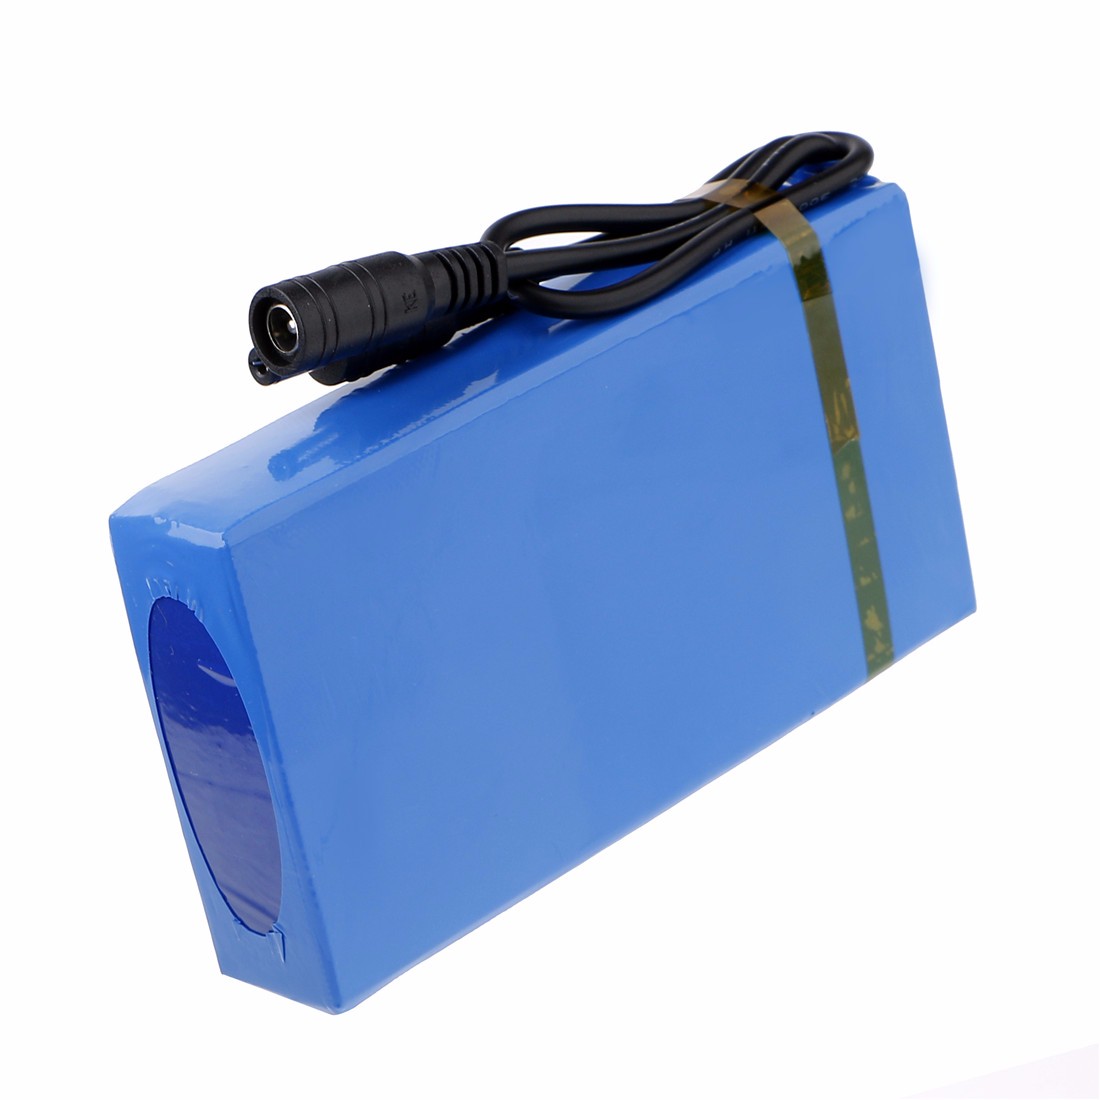 Find DC12V 8000mAh Backup Rechargeable Li-ion Battery for CCTV Camera US-Plug Motor Monitoring for Sale on Gipsybee.com with cryptocurrencies